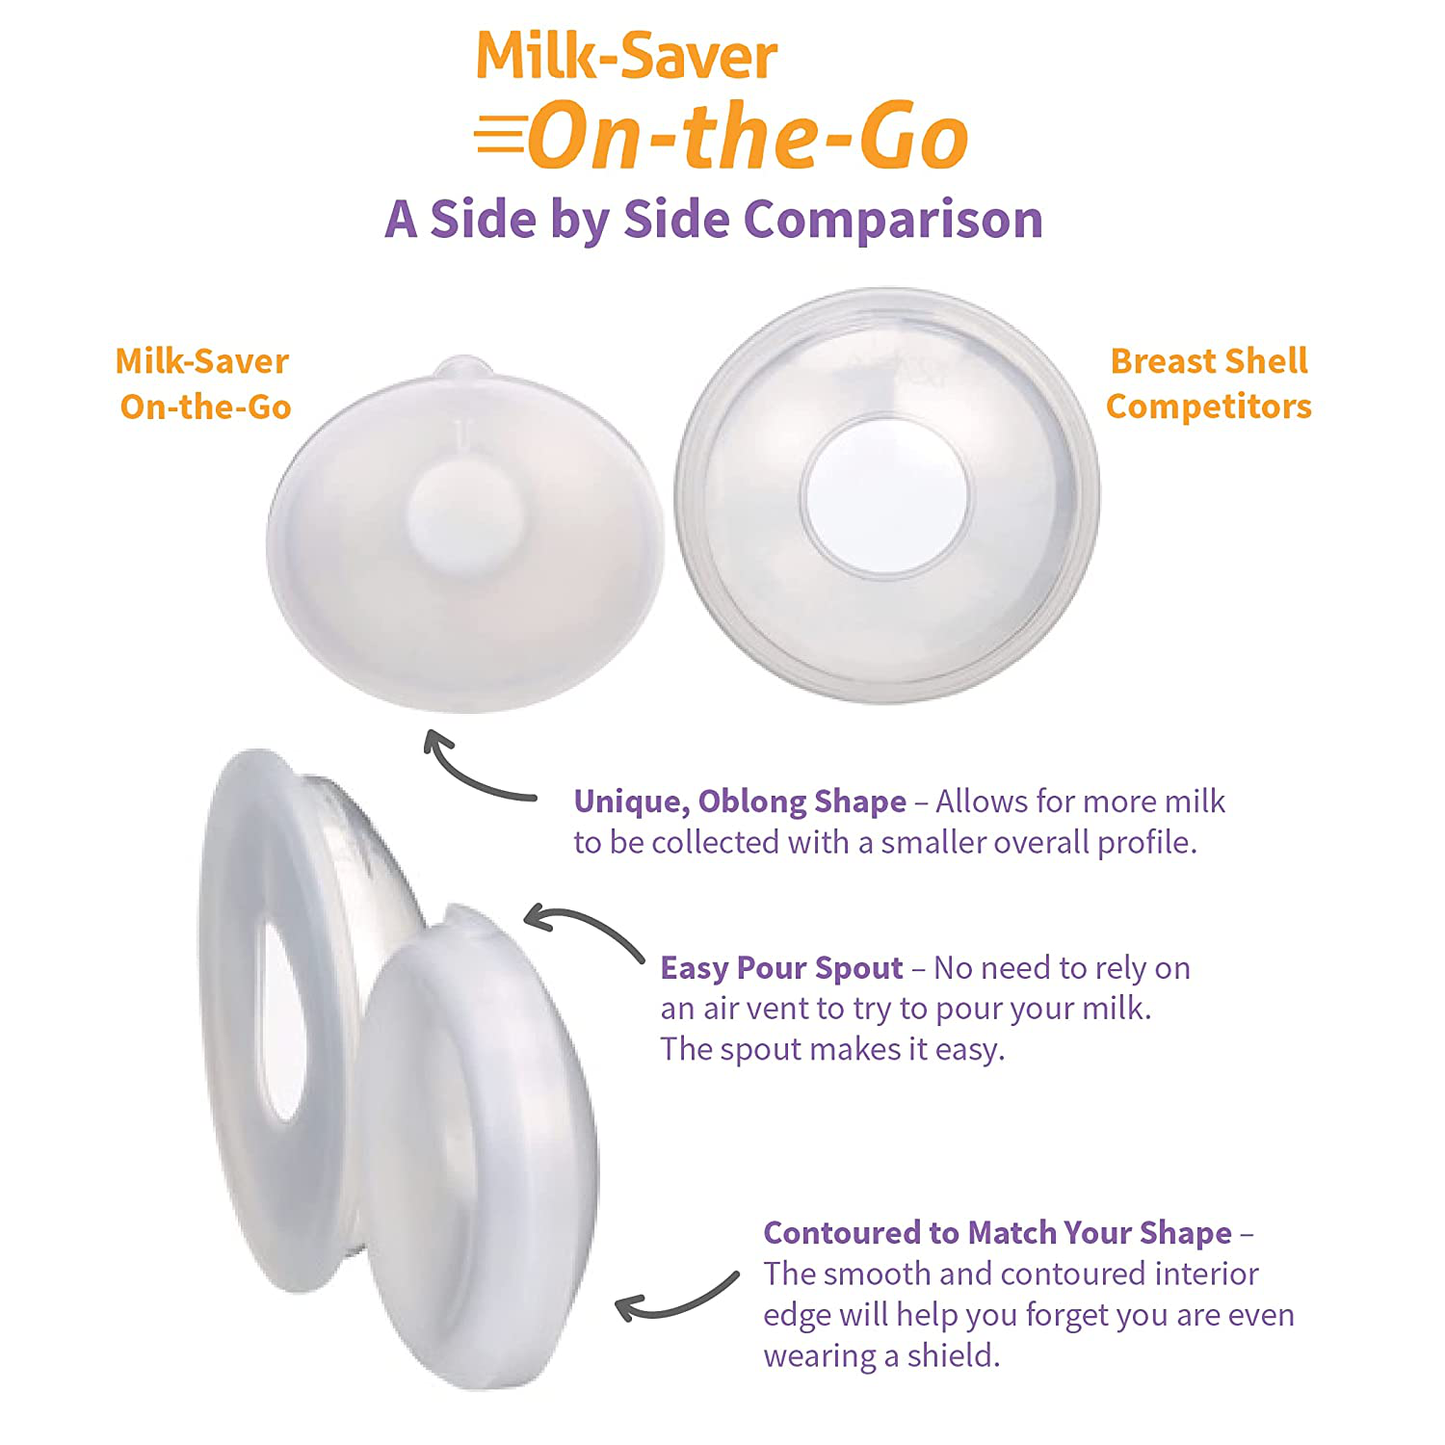 Milkies Milk-Saver On-The-Go, Breast Milk Collecting Shells and Nipple Shield, Discreet and Silicone-Free Catcher for Breastmilk, Collector Cups for Nursing & Breastfeeding, Holds More Than 1oz